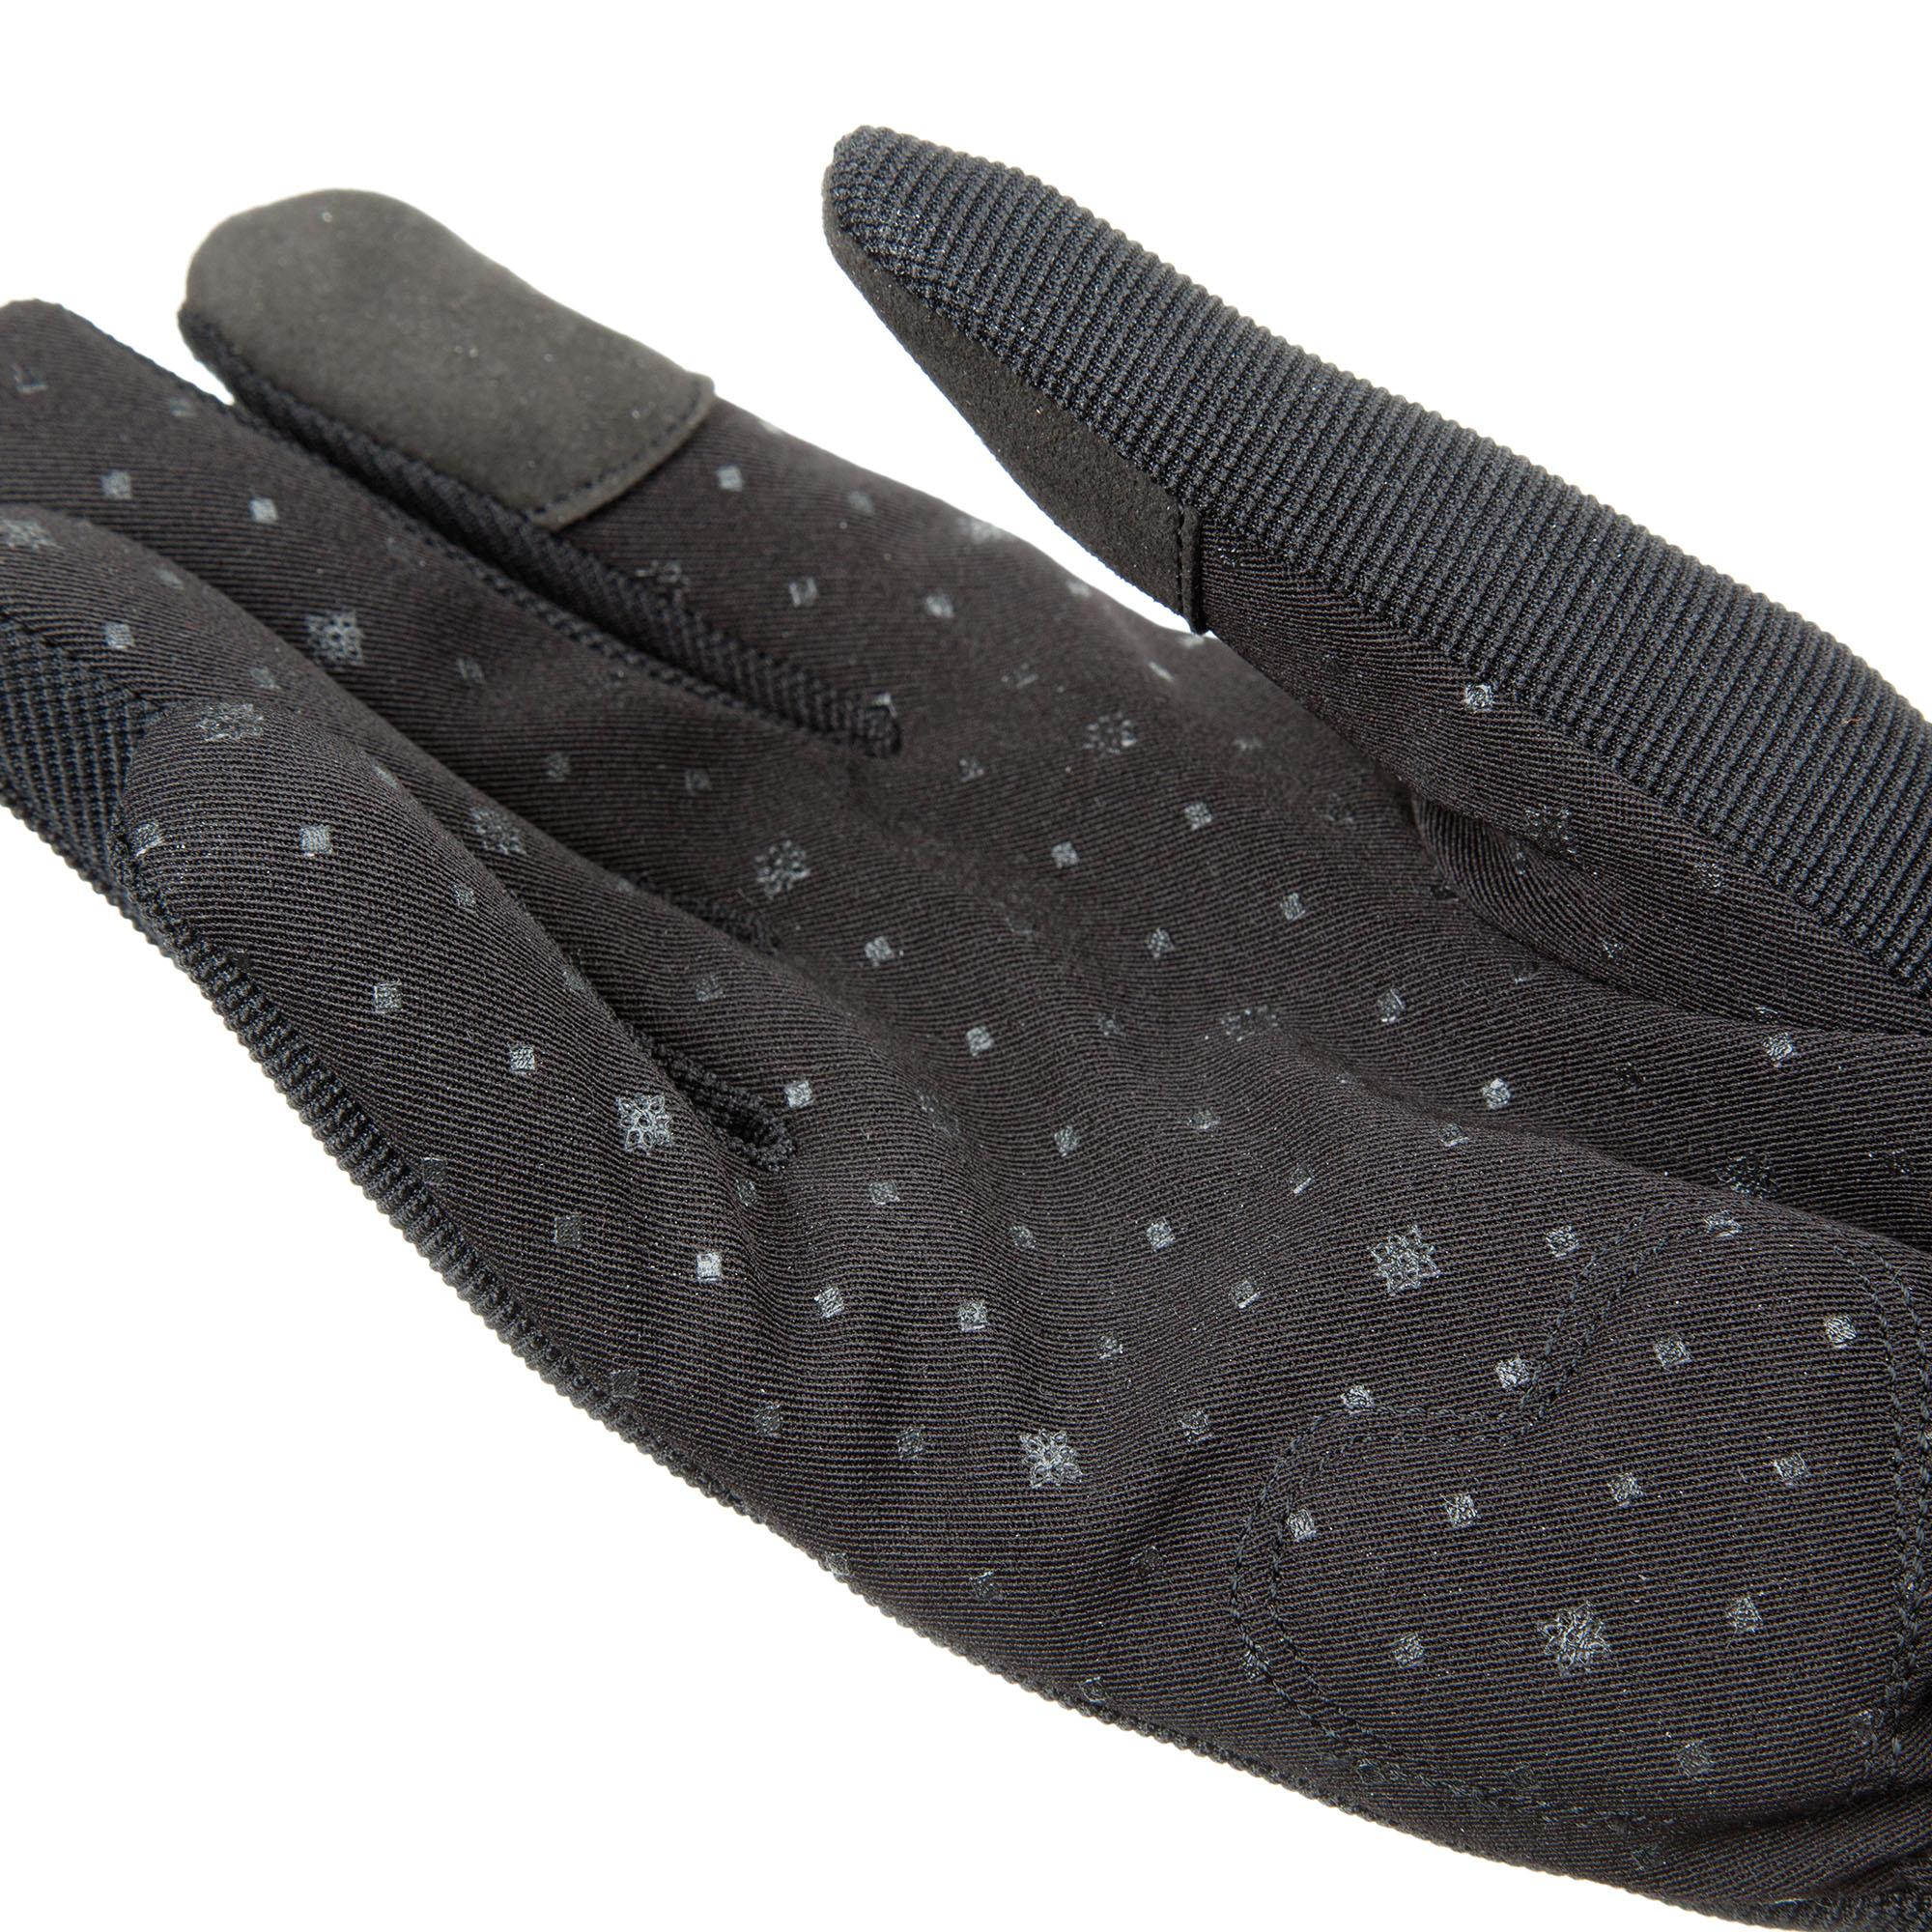 WINTER URBAN TUCANO GLOVES NEW MARY TOUCH WATERPROOF